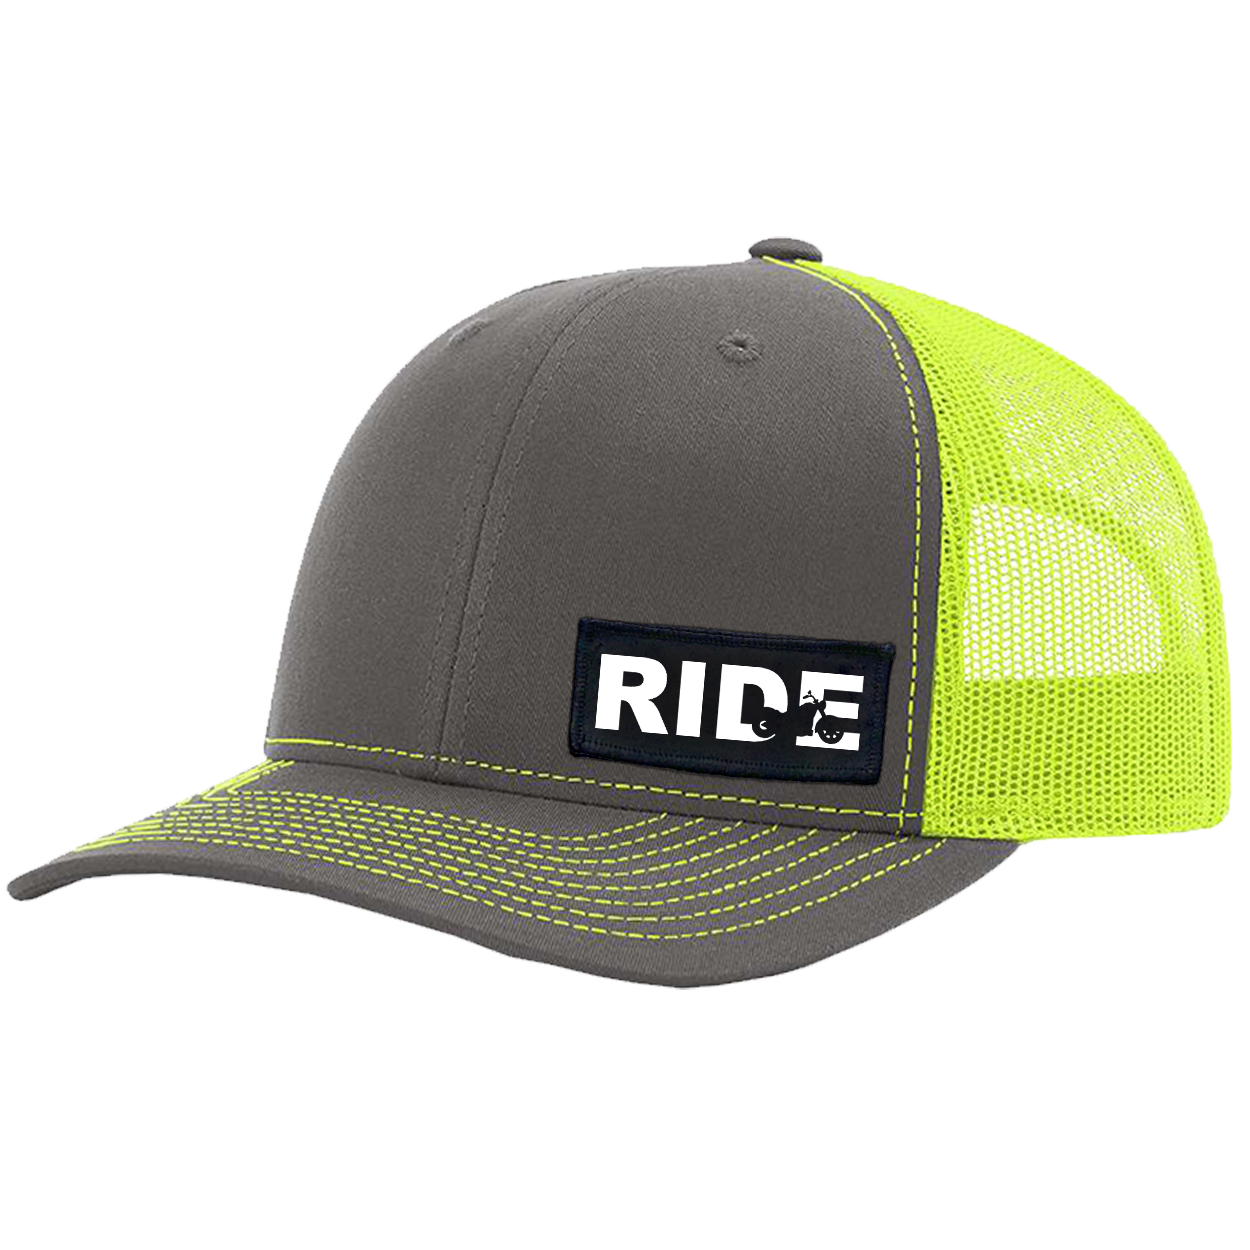 Ride Cruiser Logo Night Out Woven Patch Snapback Trucker Hat Charcoal/Neon Yellow (White Logo)